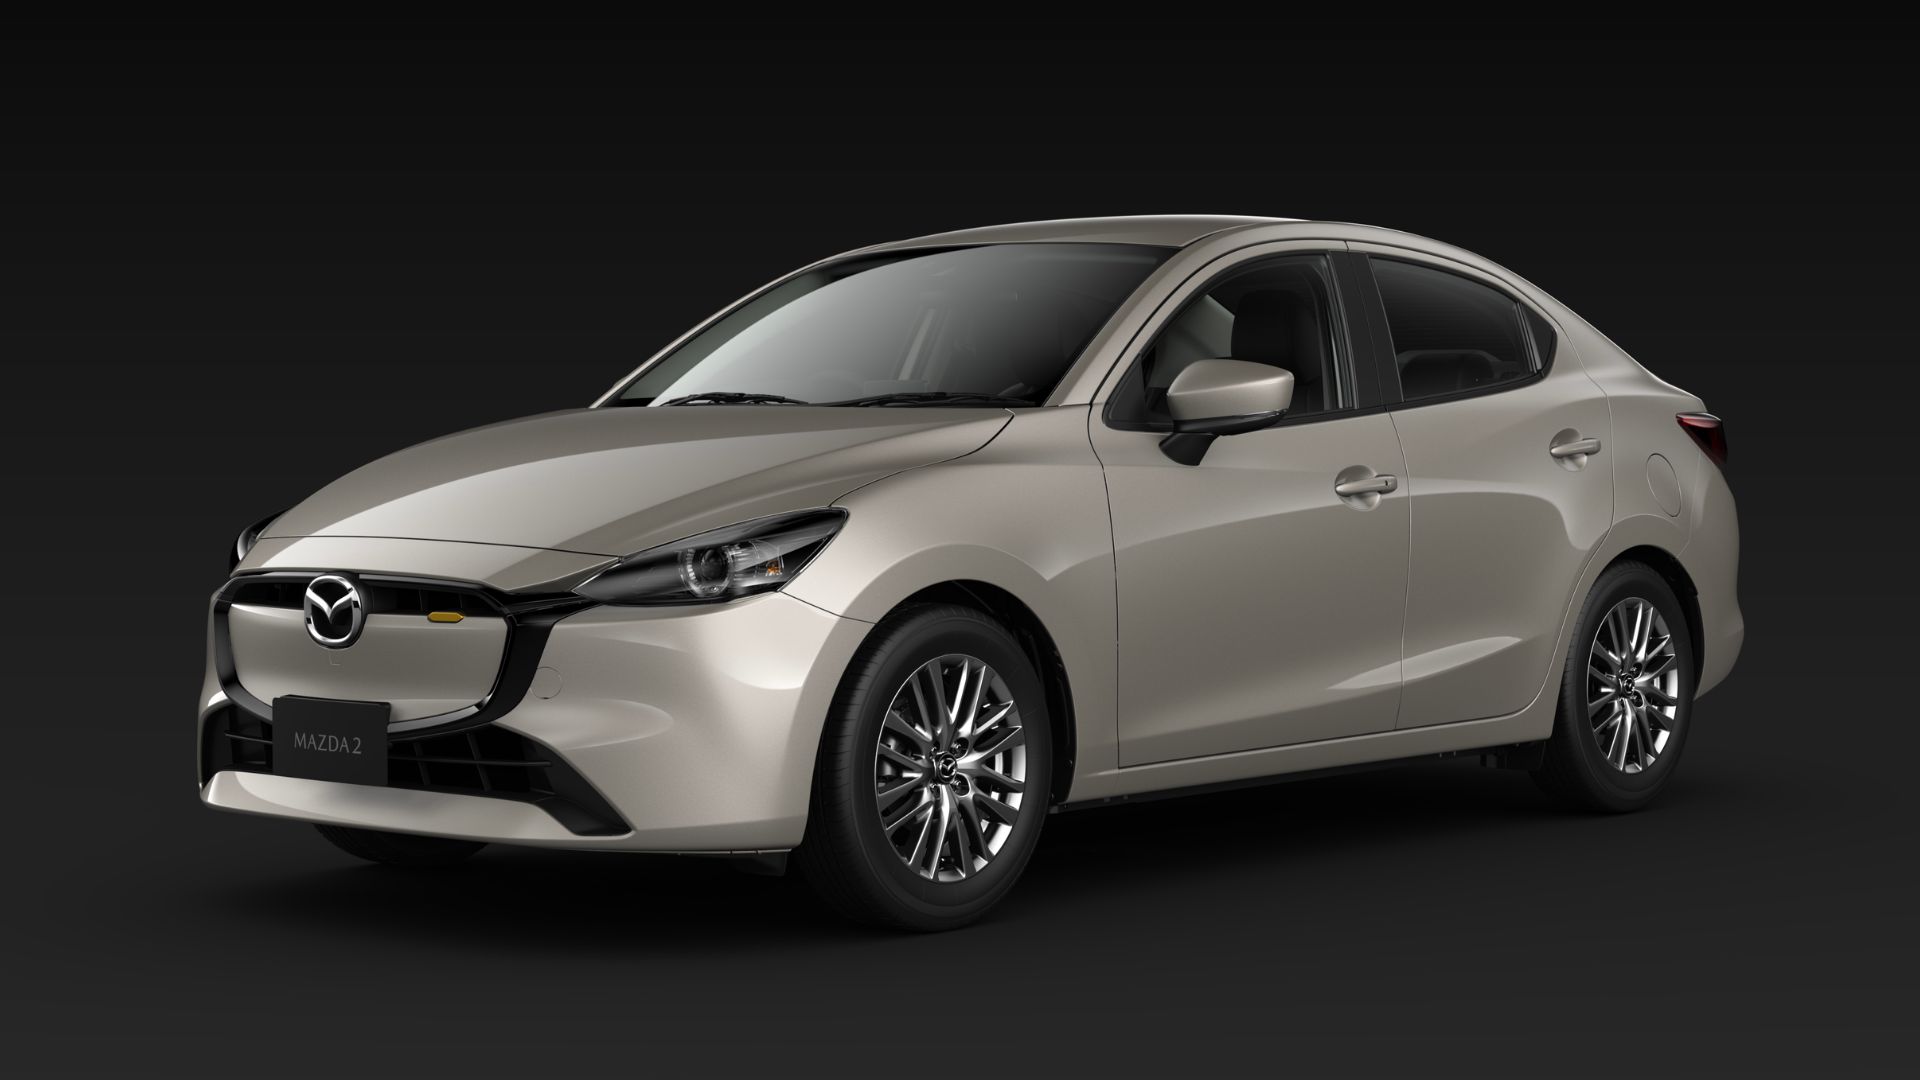 Facelifted Mazda2 Sedan Makes Its Debut In Thailand